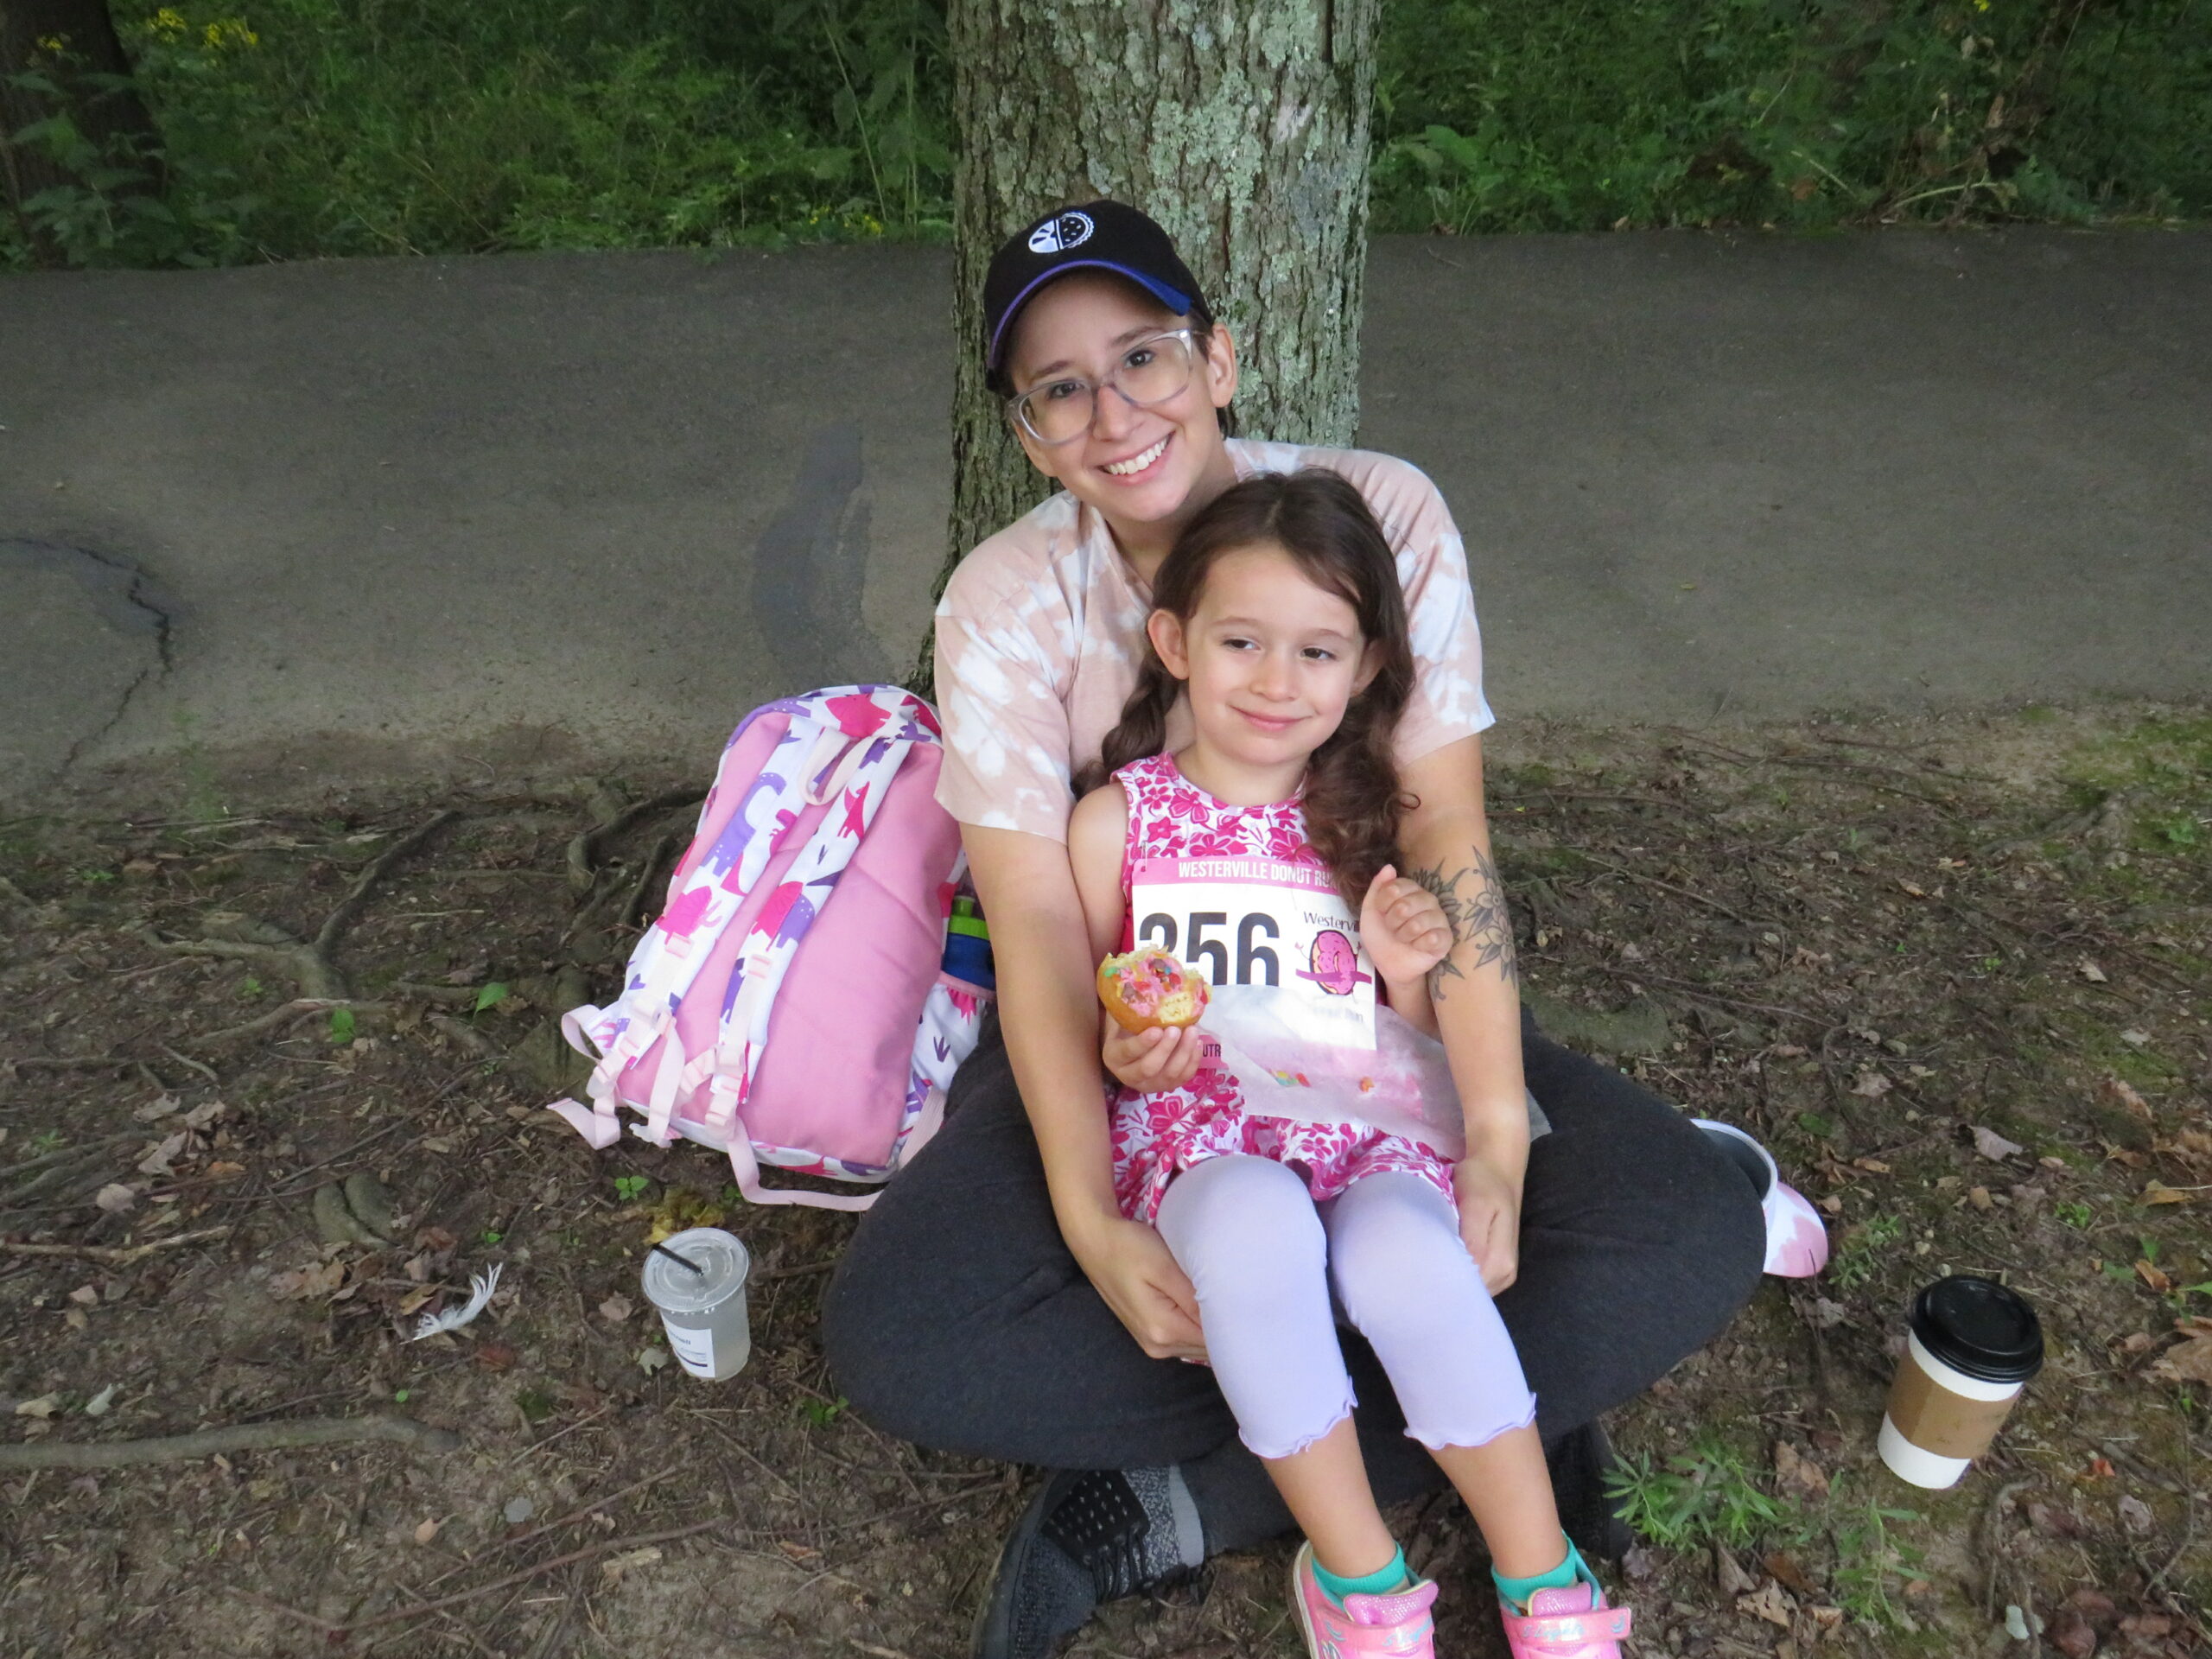 Ohio Mother's Day 1mi, 5k, 10k and Kids Fun Run - Westerville Donut Run - Columbus Donut Run - Kids Donut Dash - Mother Daughter 5k - USA Race Timing & Event Management - Race Chip Timing